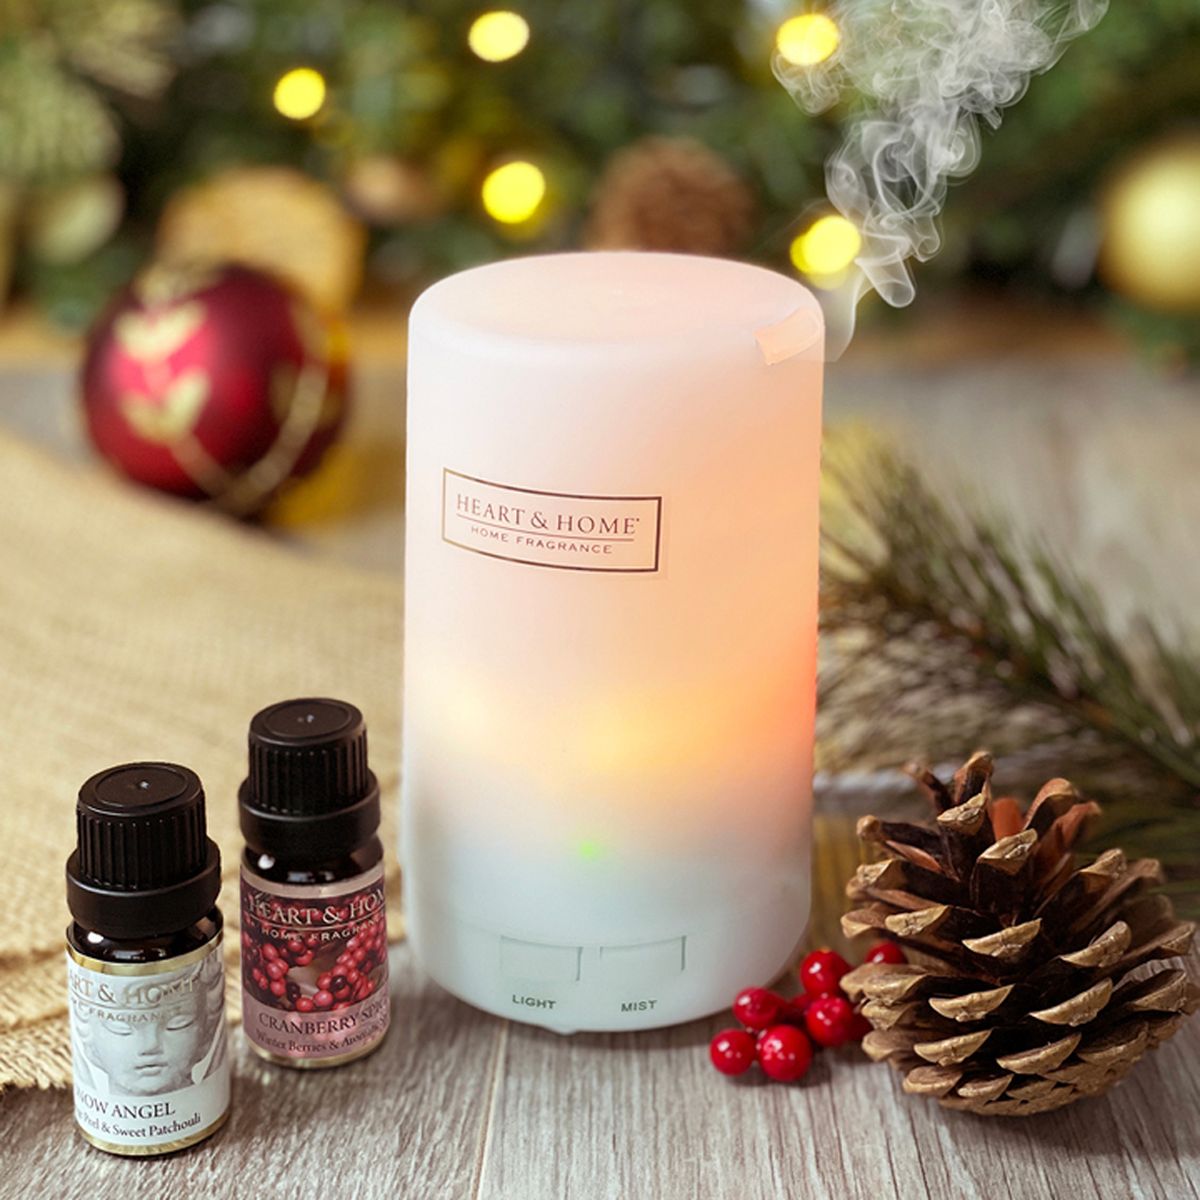 Aroma Diffuser and Oils Gift Set - Heart and Home